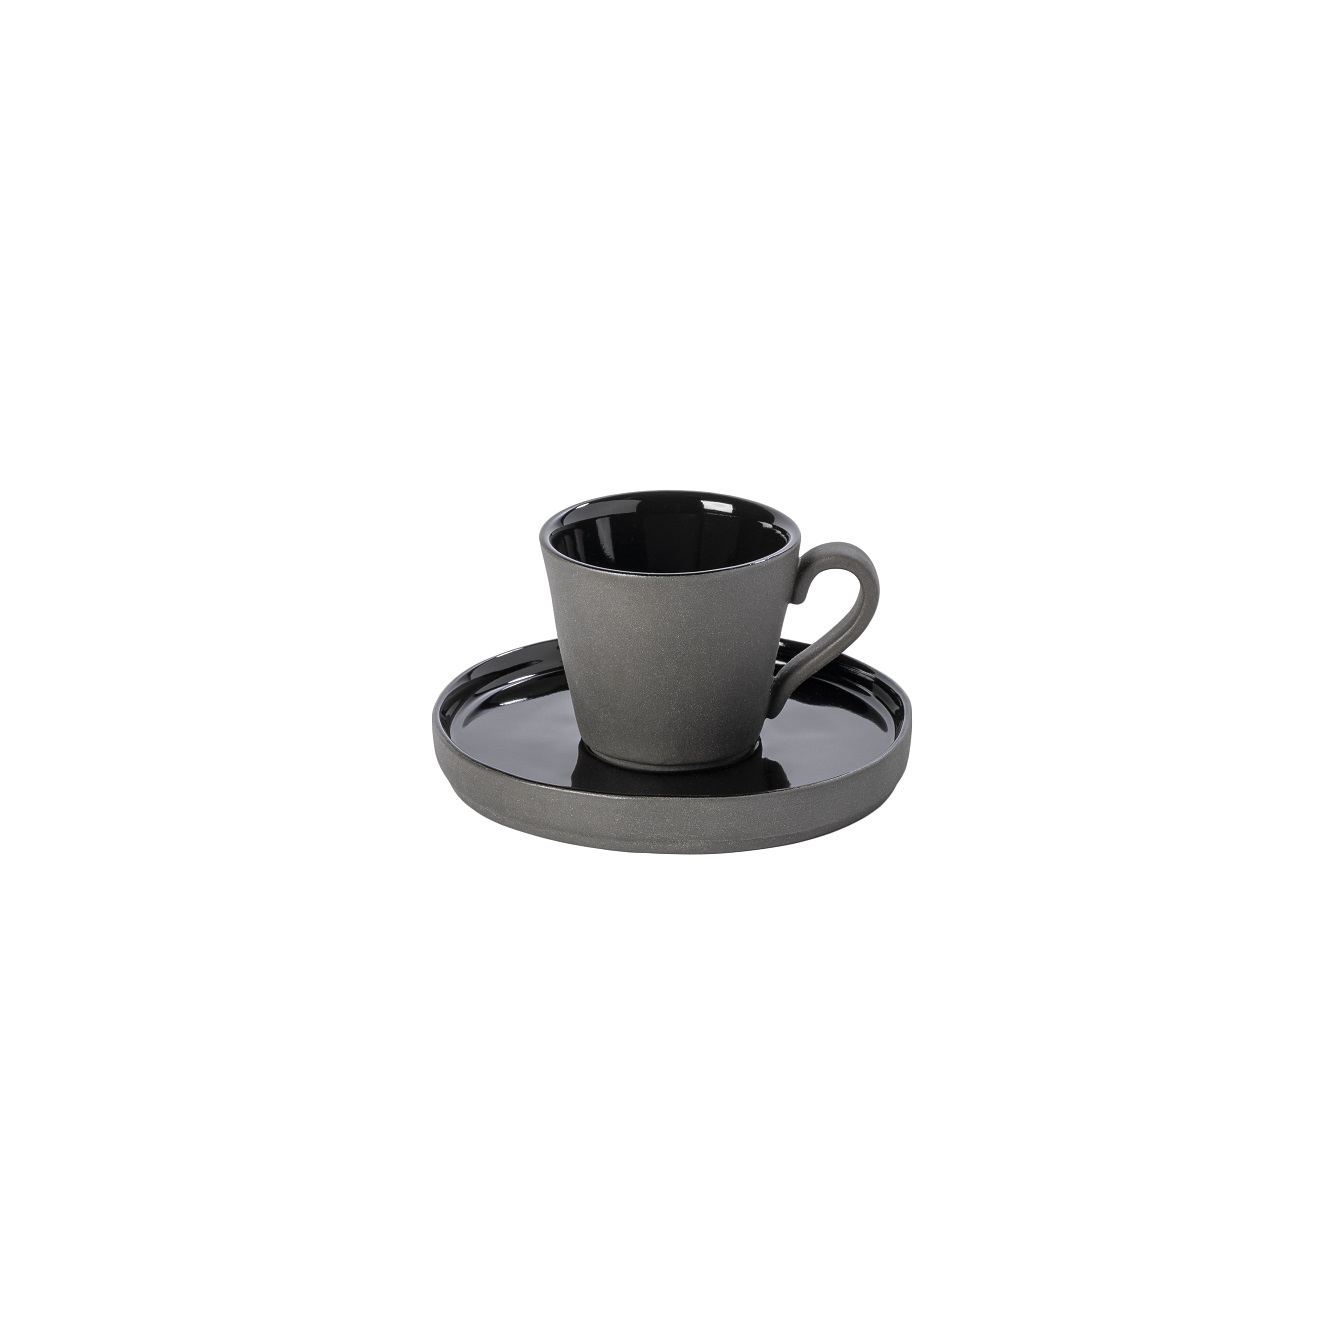 Lagoa Eco-gres Black Coffee Cup & Saucer 0.09l Gift